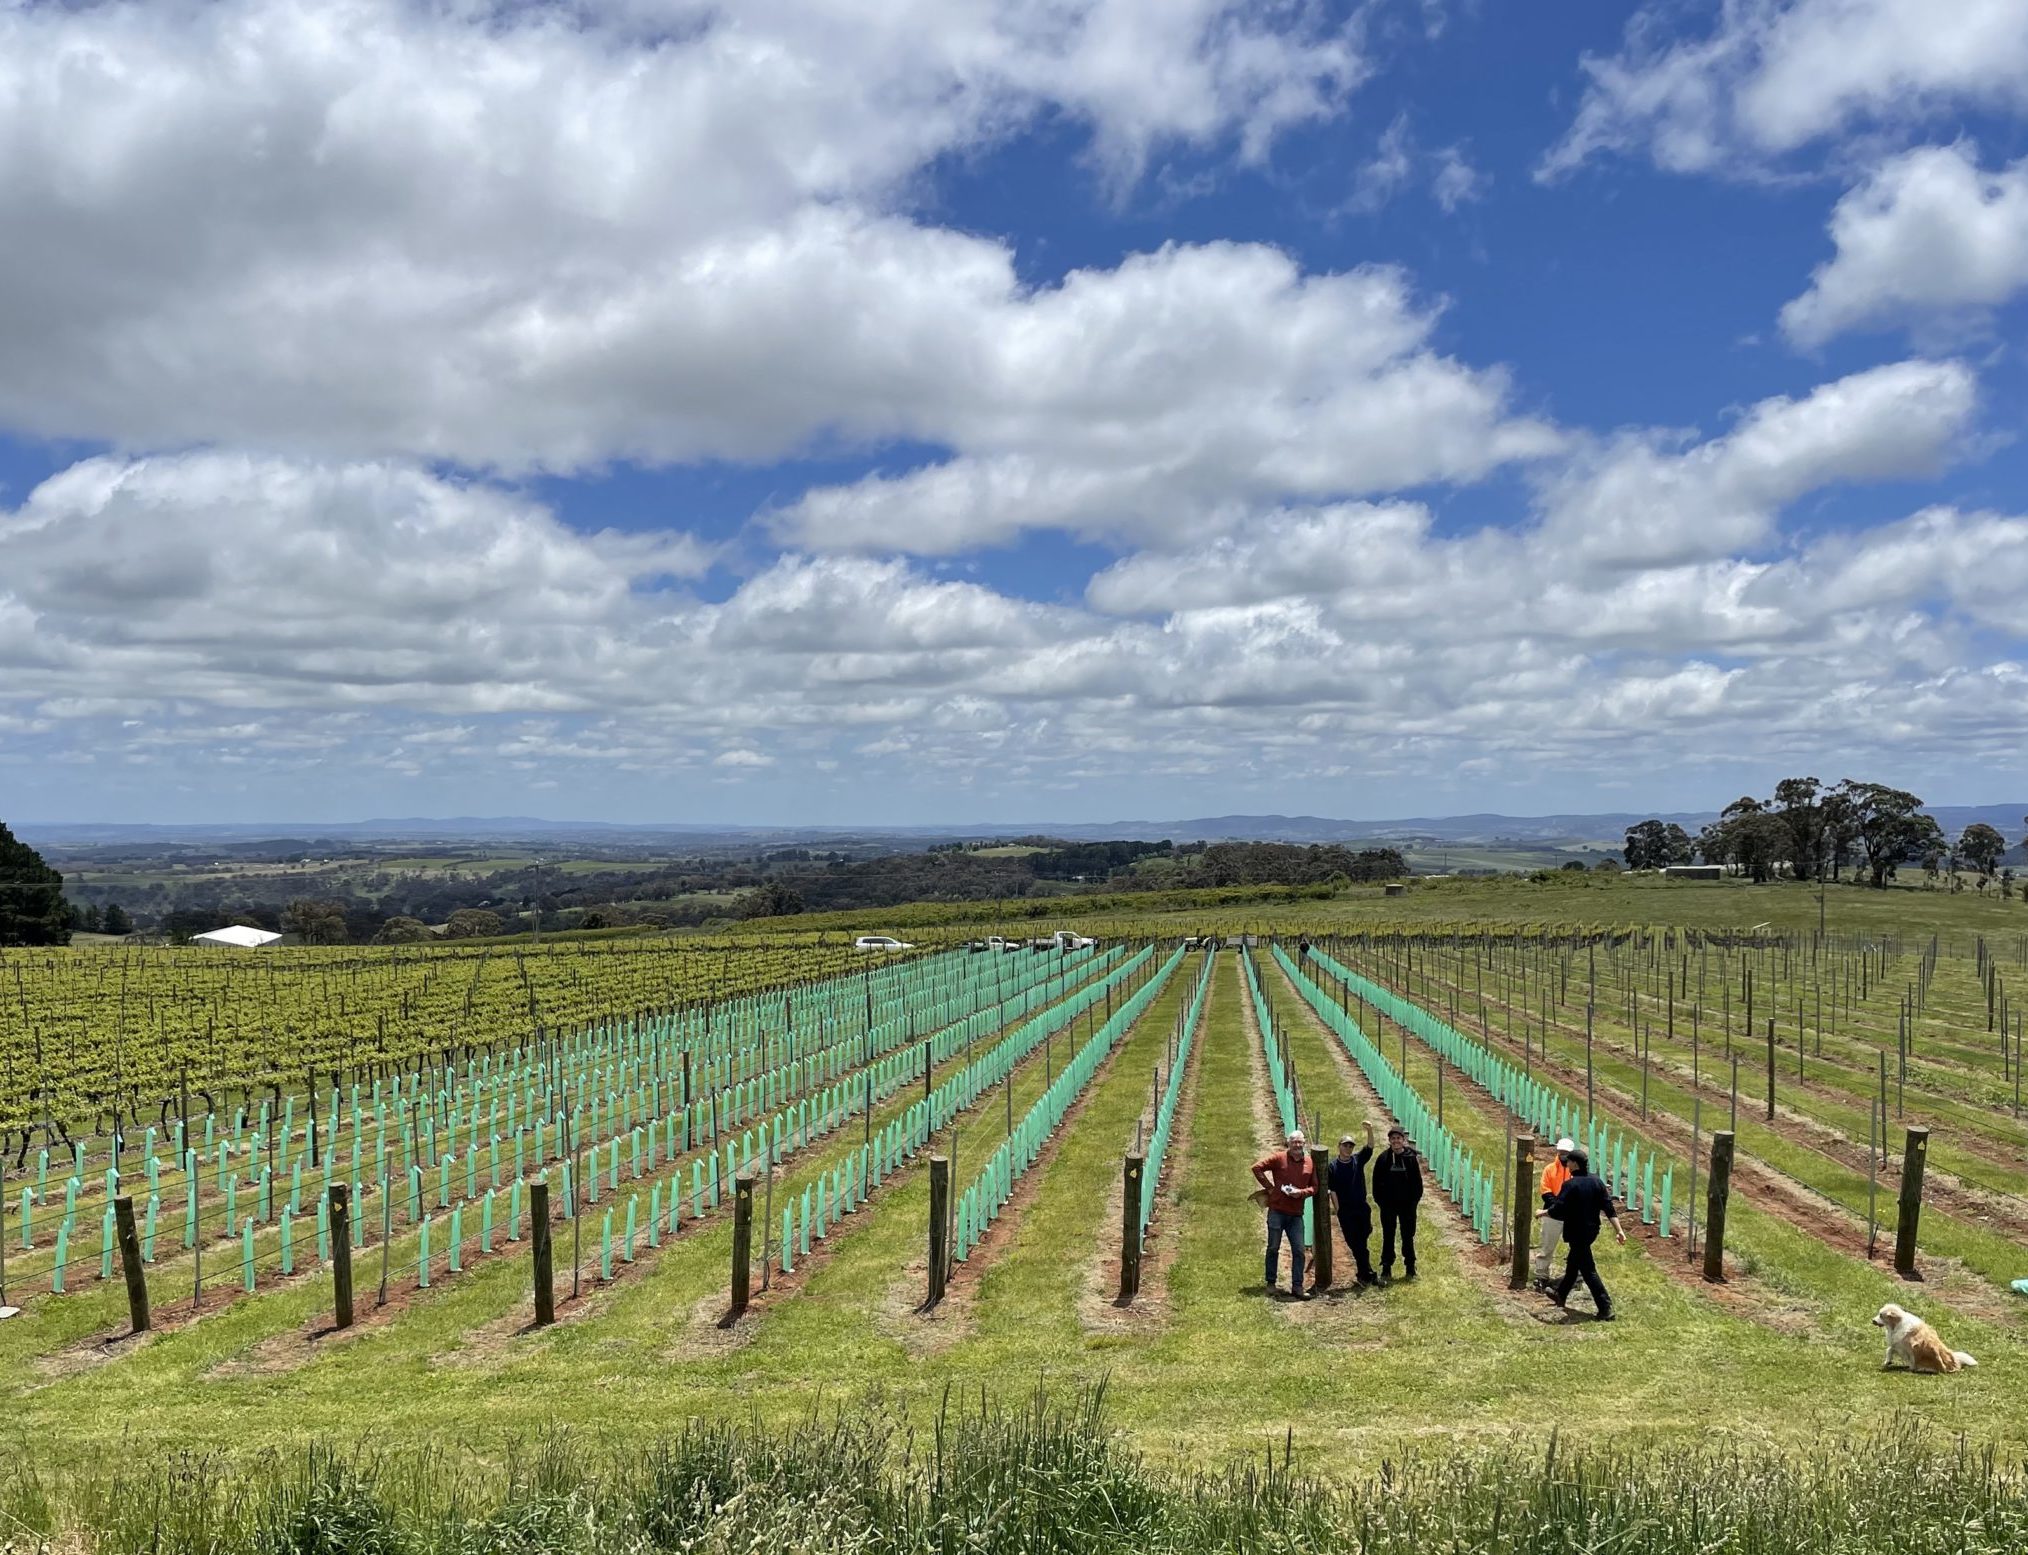 2022 - New Plantings Chardonnay & Riesling vines.
Bernard 95 & 76, 1066 & 548 clones of Chardonnay.
Then first Riesling plantings of three clones GM198, GM110 & GM239.
All 6500 Chardonnay and Riesling vines were close planted at 1 metre spacings at Forest Edge Vineyard, 1 km west of Lofty Vineyard at the same altitude.
